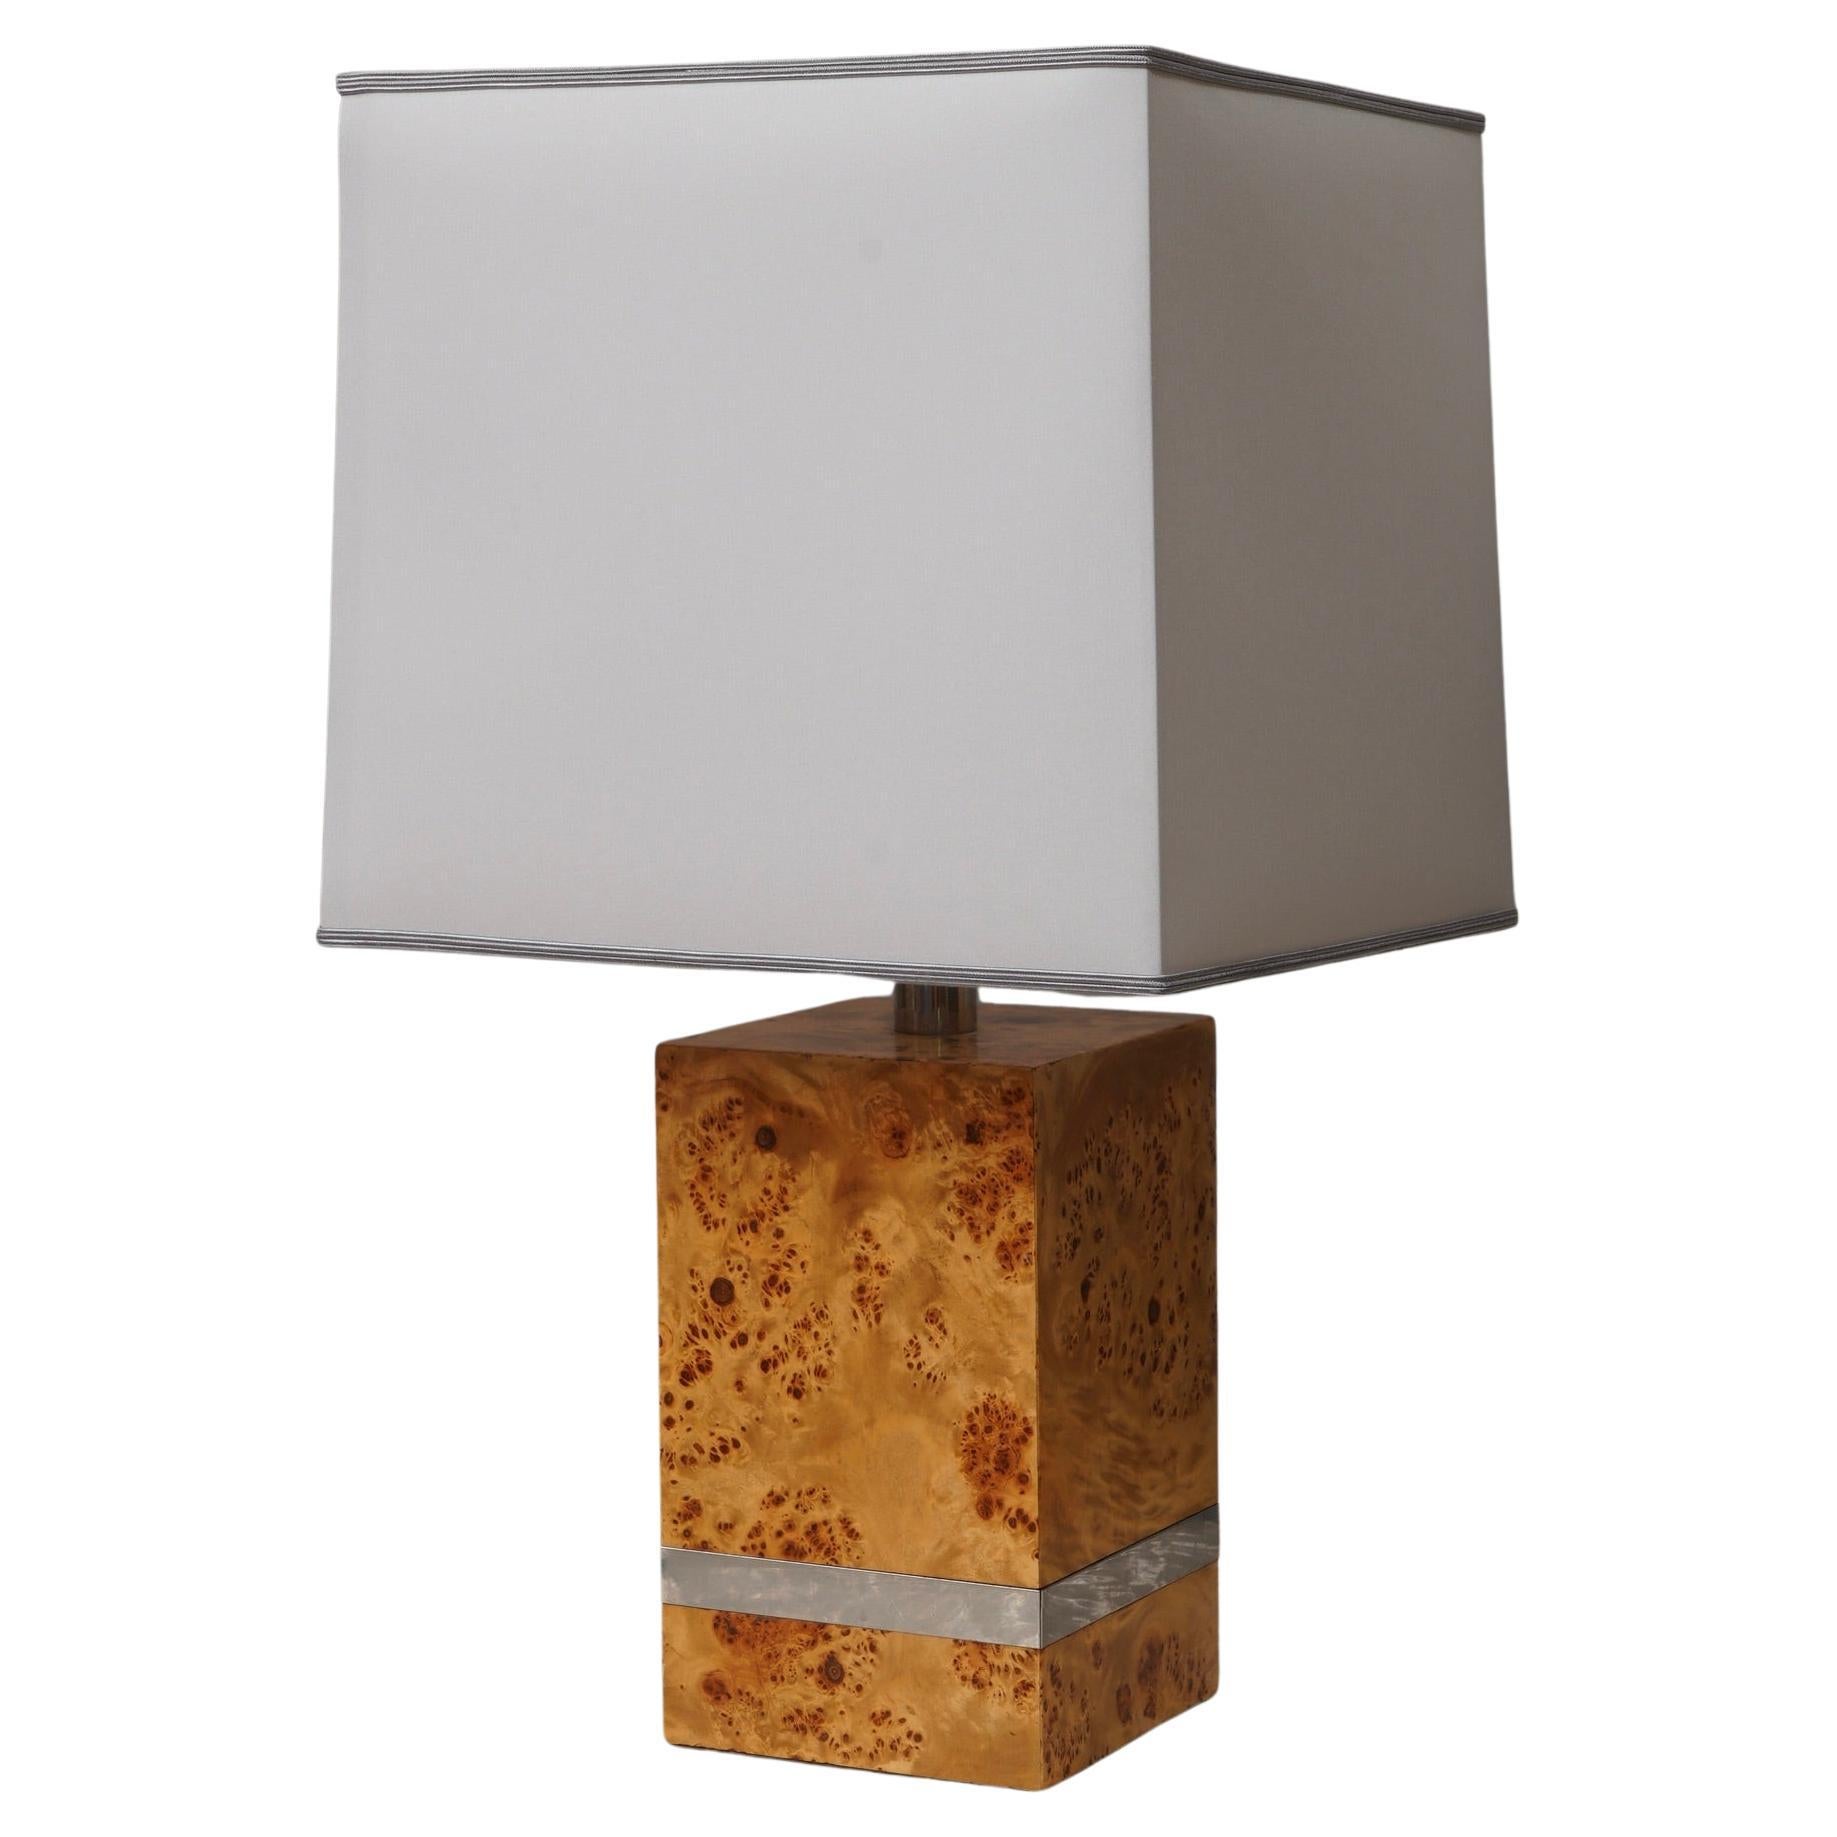 Tommaso Barbi Maple Wood Table Lamp, 1980 For Sale